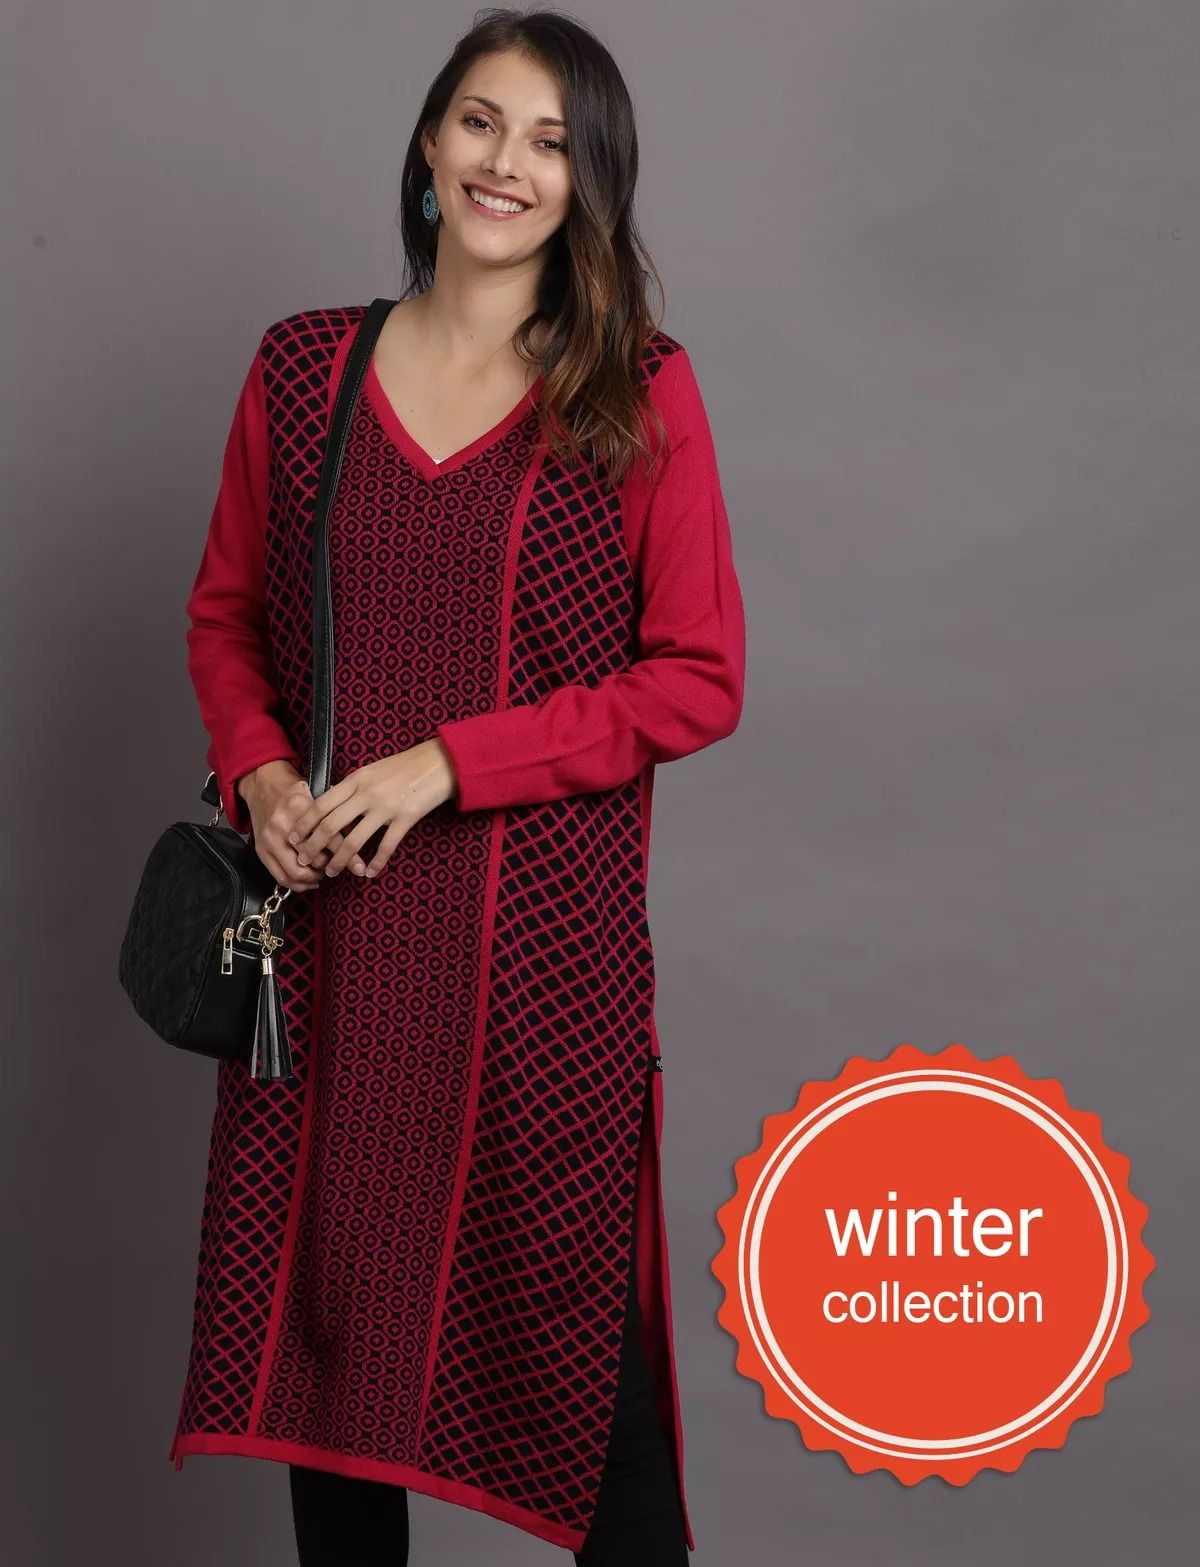 Shop Winter Suits for Women Online at the Best Price | Libas